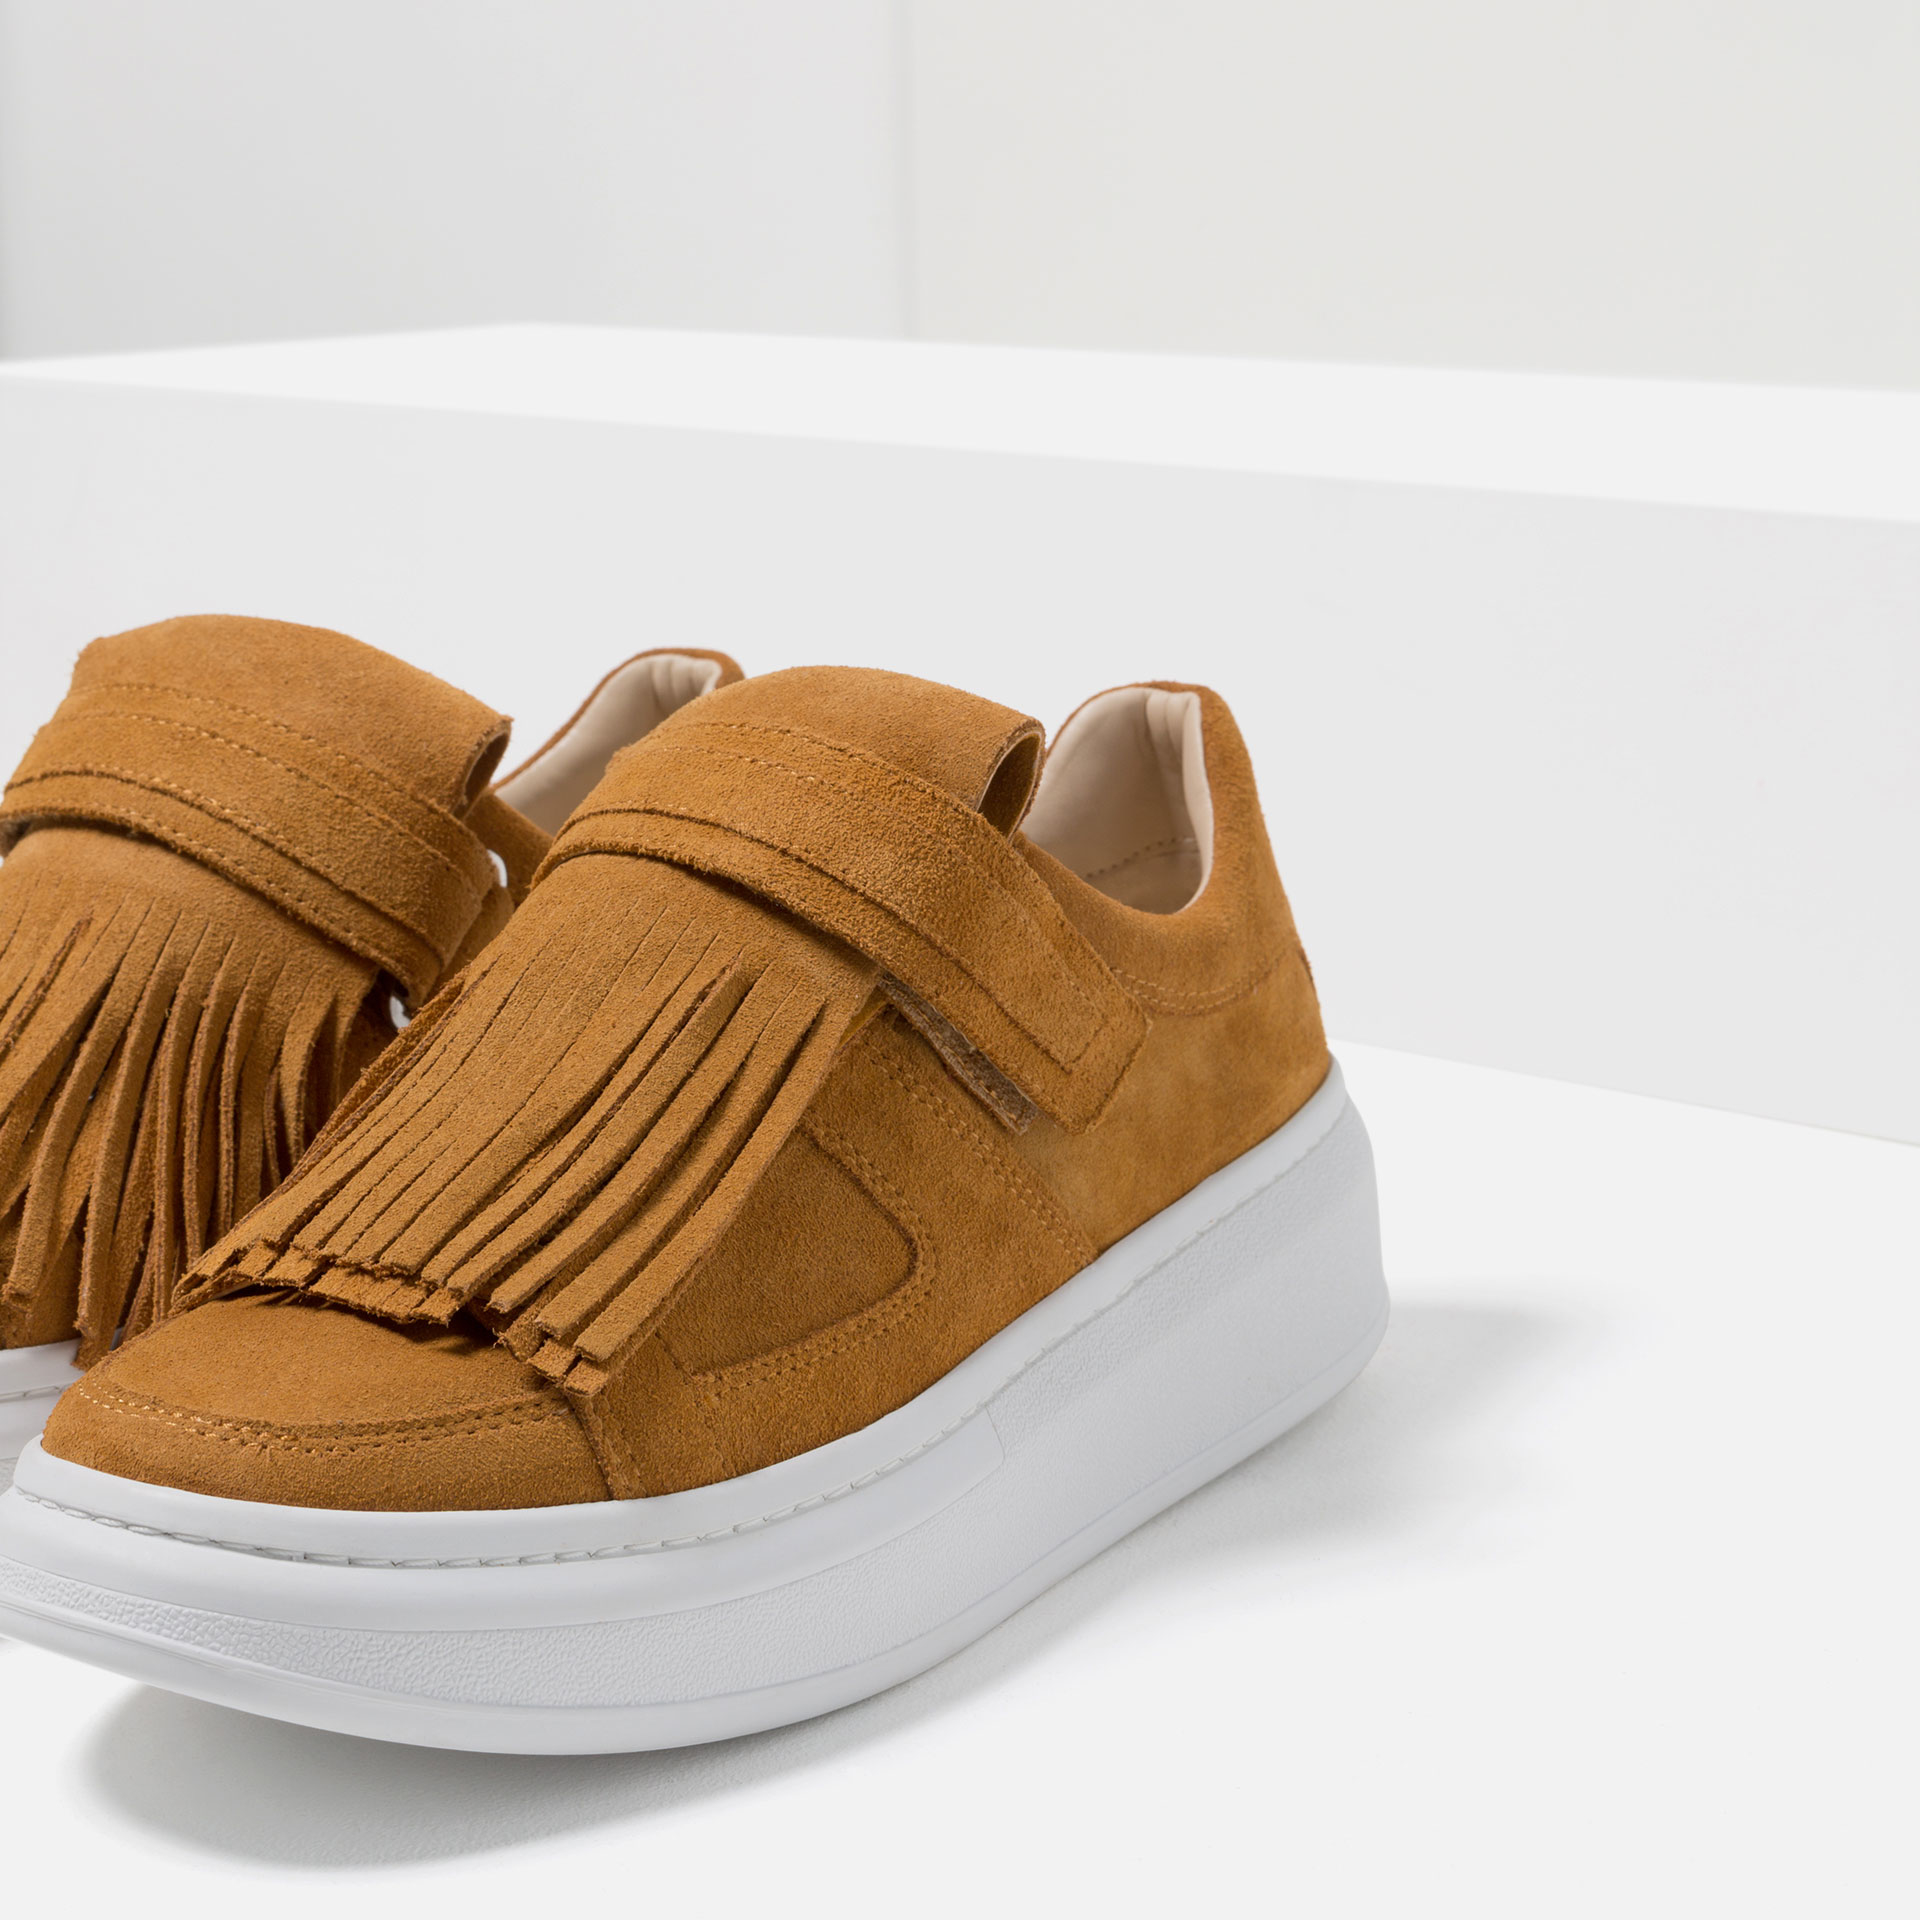 Zara Leather Sneakers With Removable Fringe in Natural | Lyst